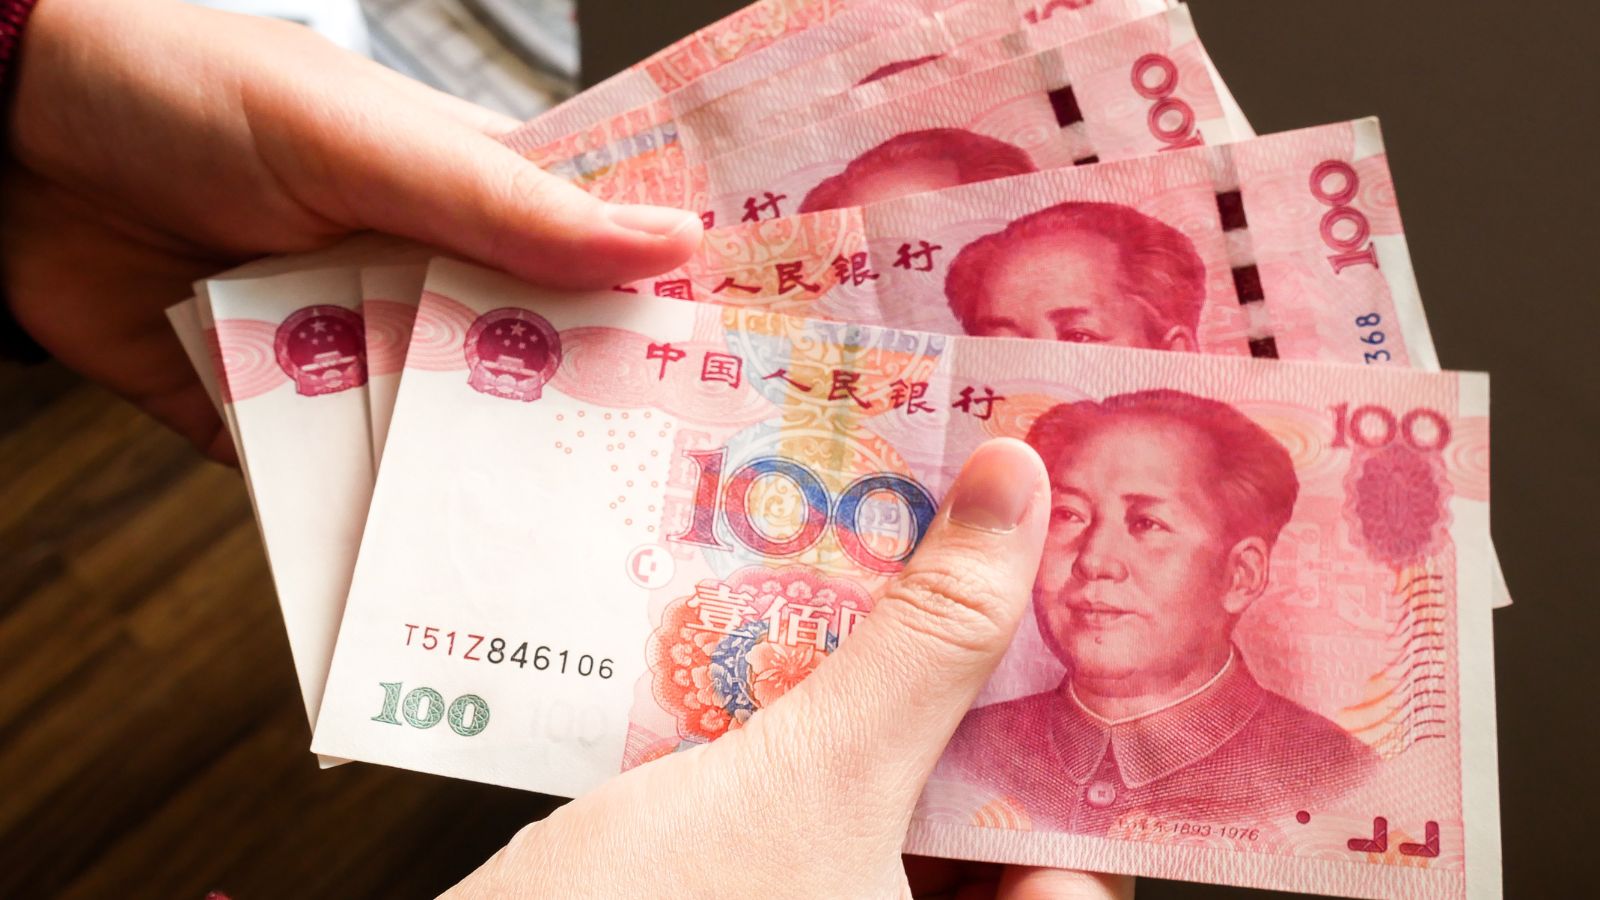 <p>The Chinese Yuan (RMB) is the official currency of China. Both credit and bank cards, as well as cash, are accepted at most places, so it’s advisable to carry both when making purchases. Some places work only with cash transactions, so having enough money with you is key.</p>